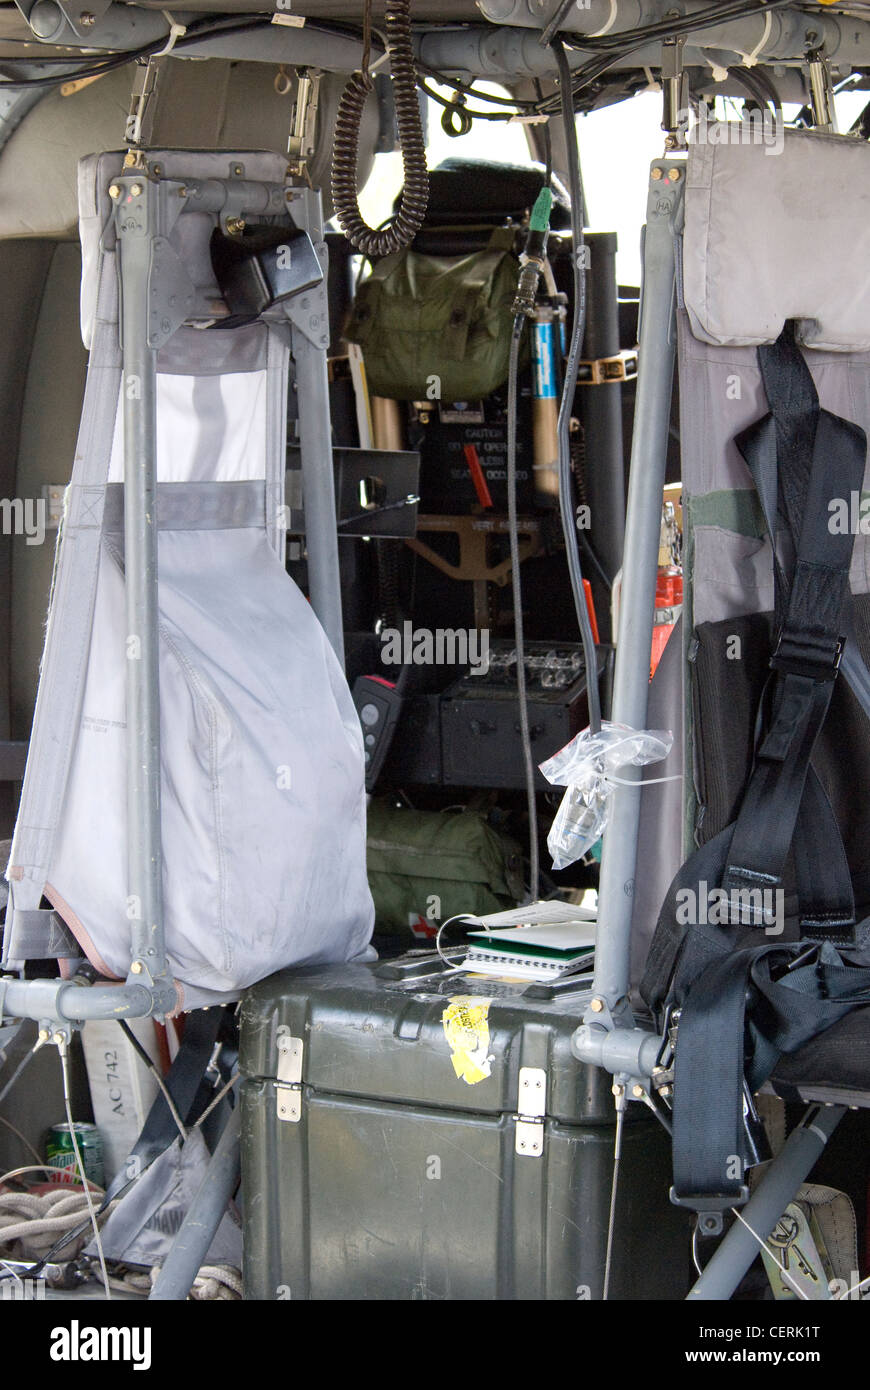 Us Army Blackhawk Helicopter Interior Stock Photo 43545764